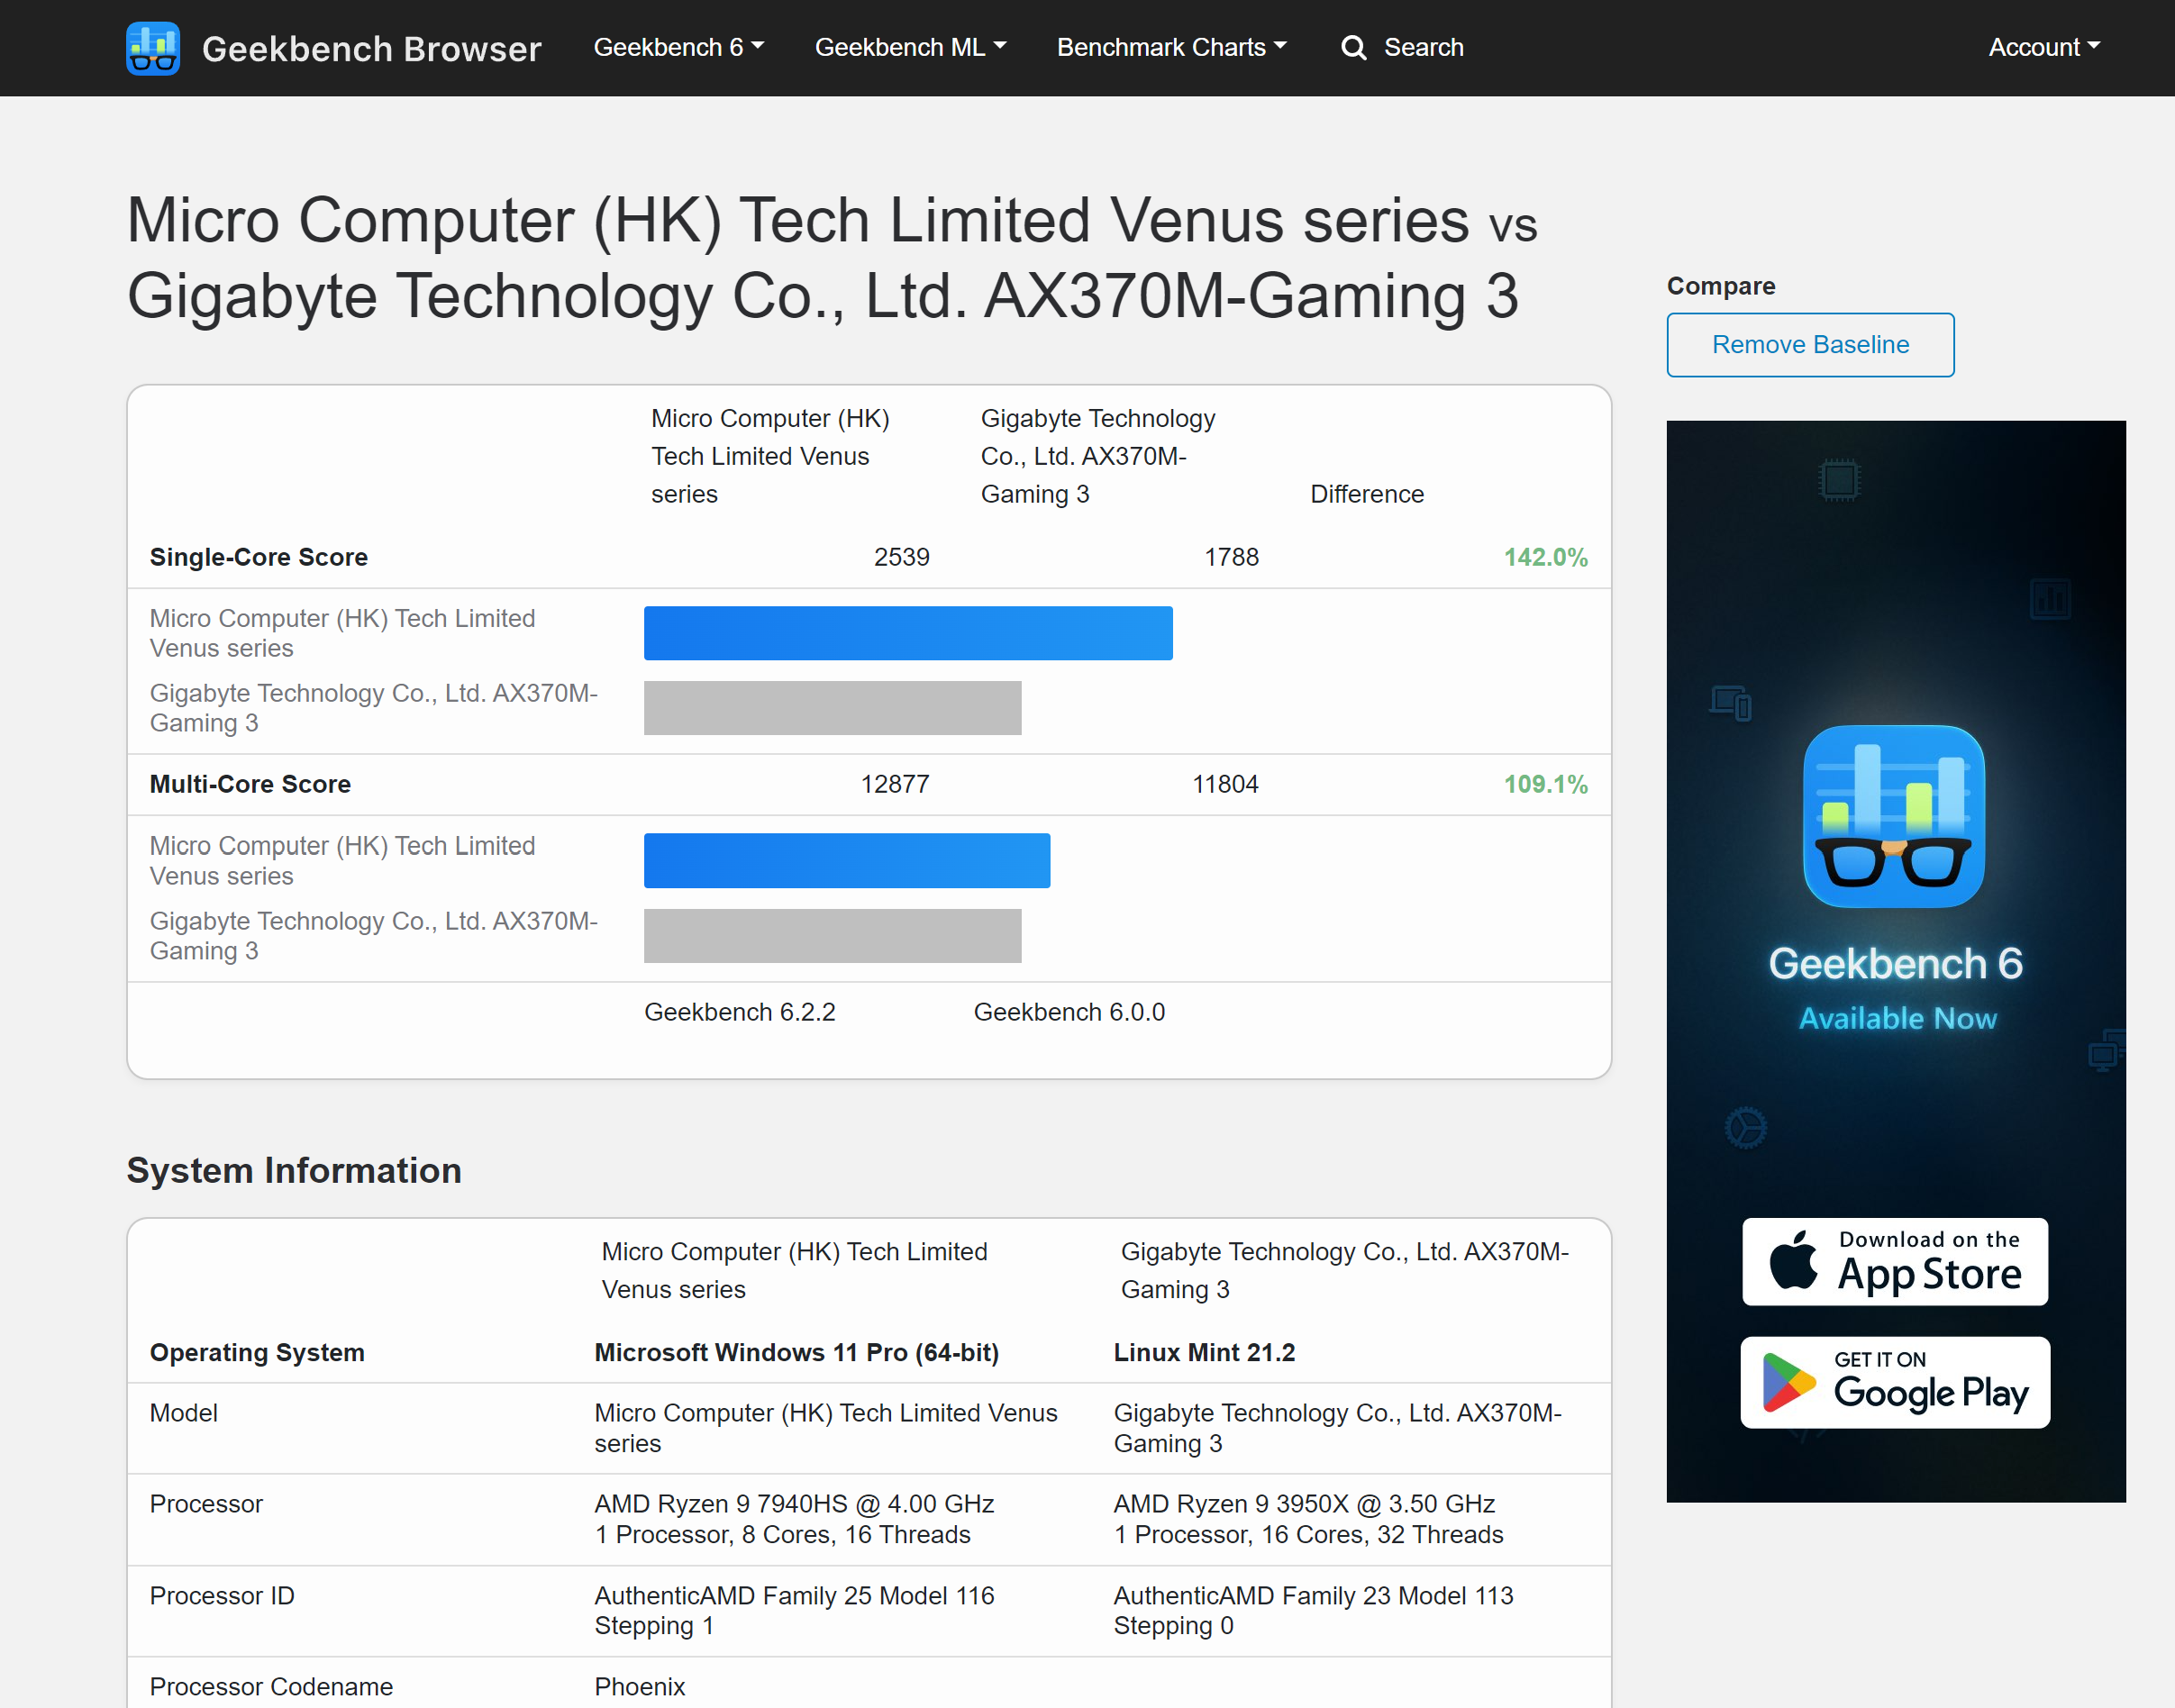 Geekbench score compare between UM790 Pro and a PC with AMD Ryzen 9 3950x CPU